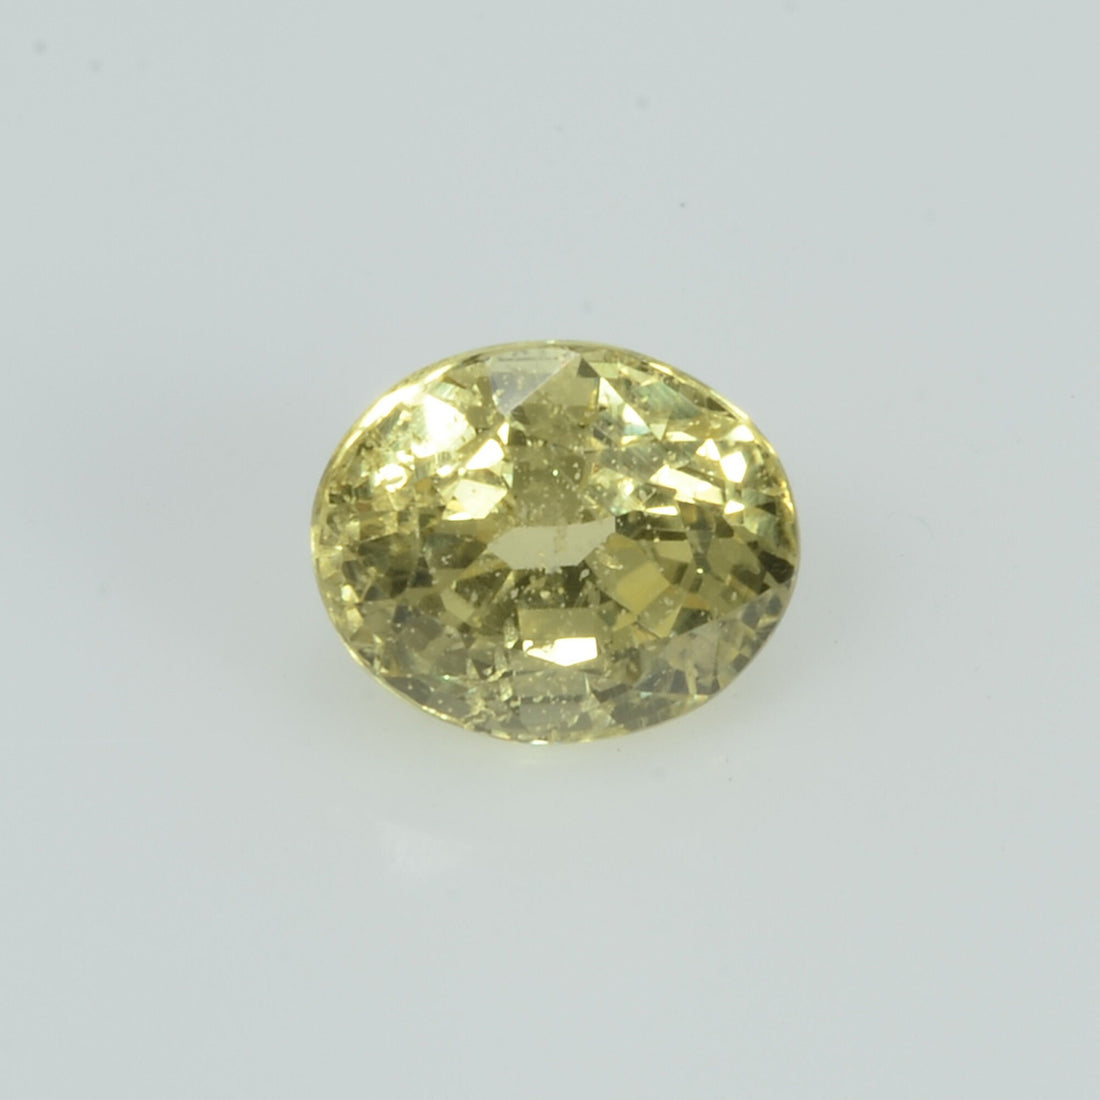 1.11 Cts Natural Yellow Sapphire Loose Gemstone Oval Cut